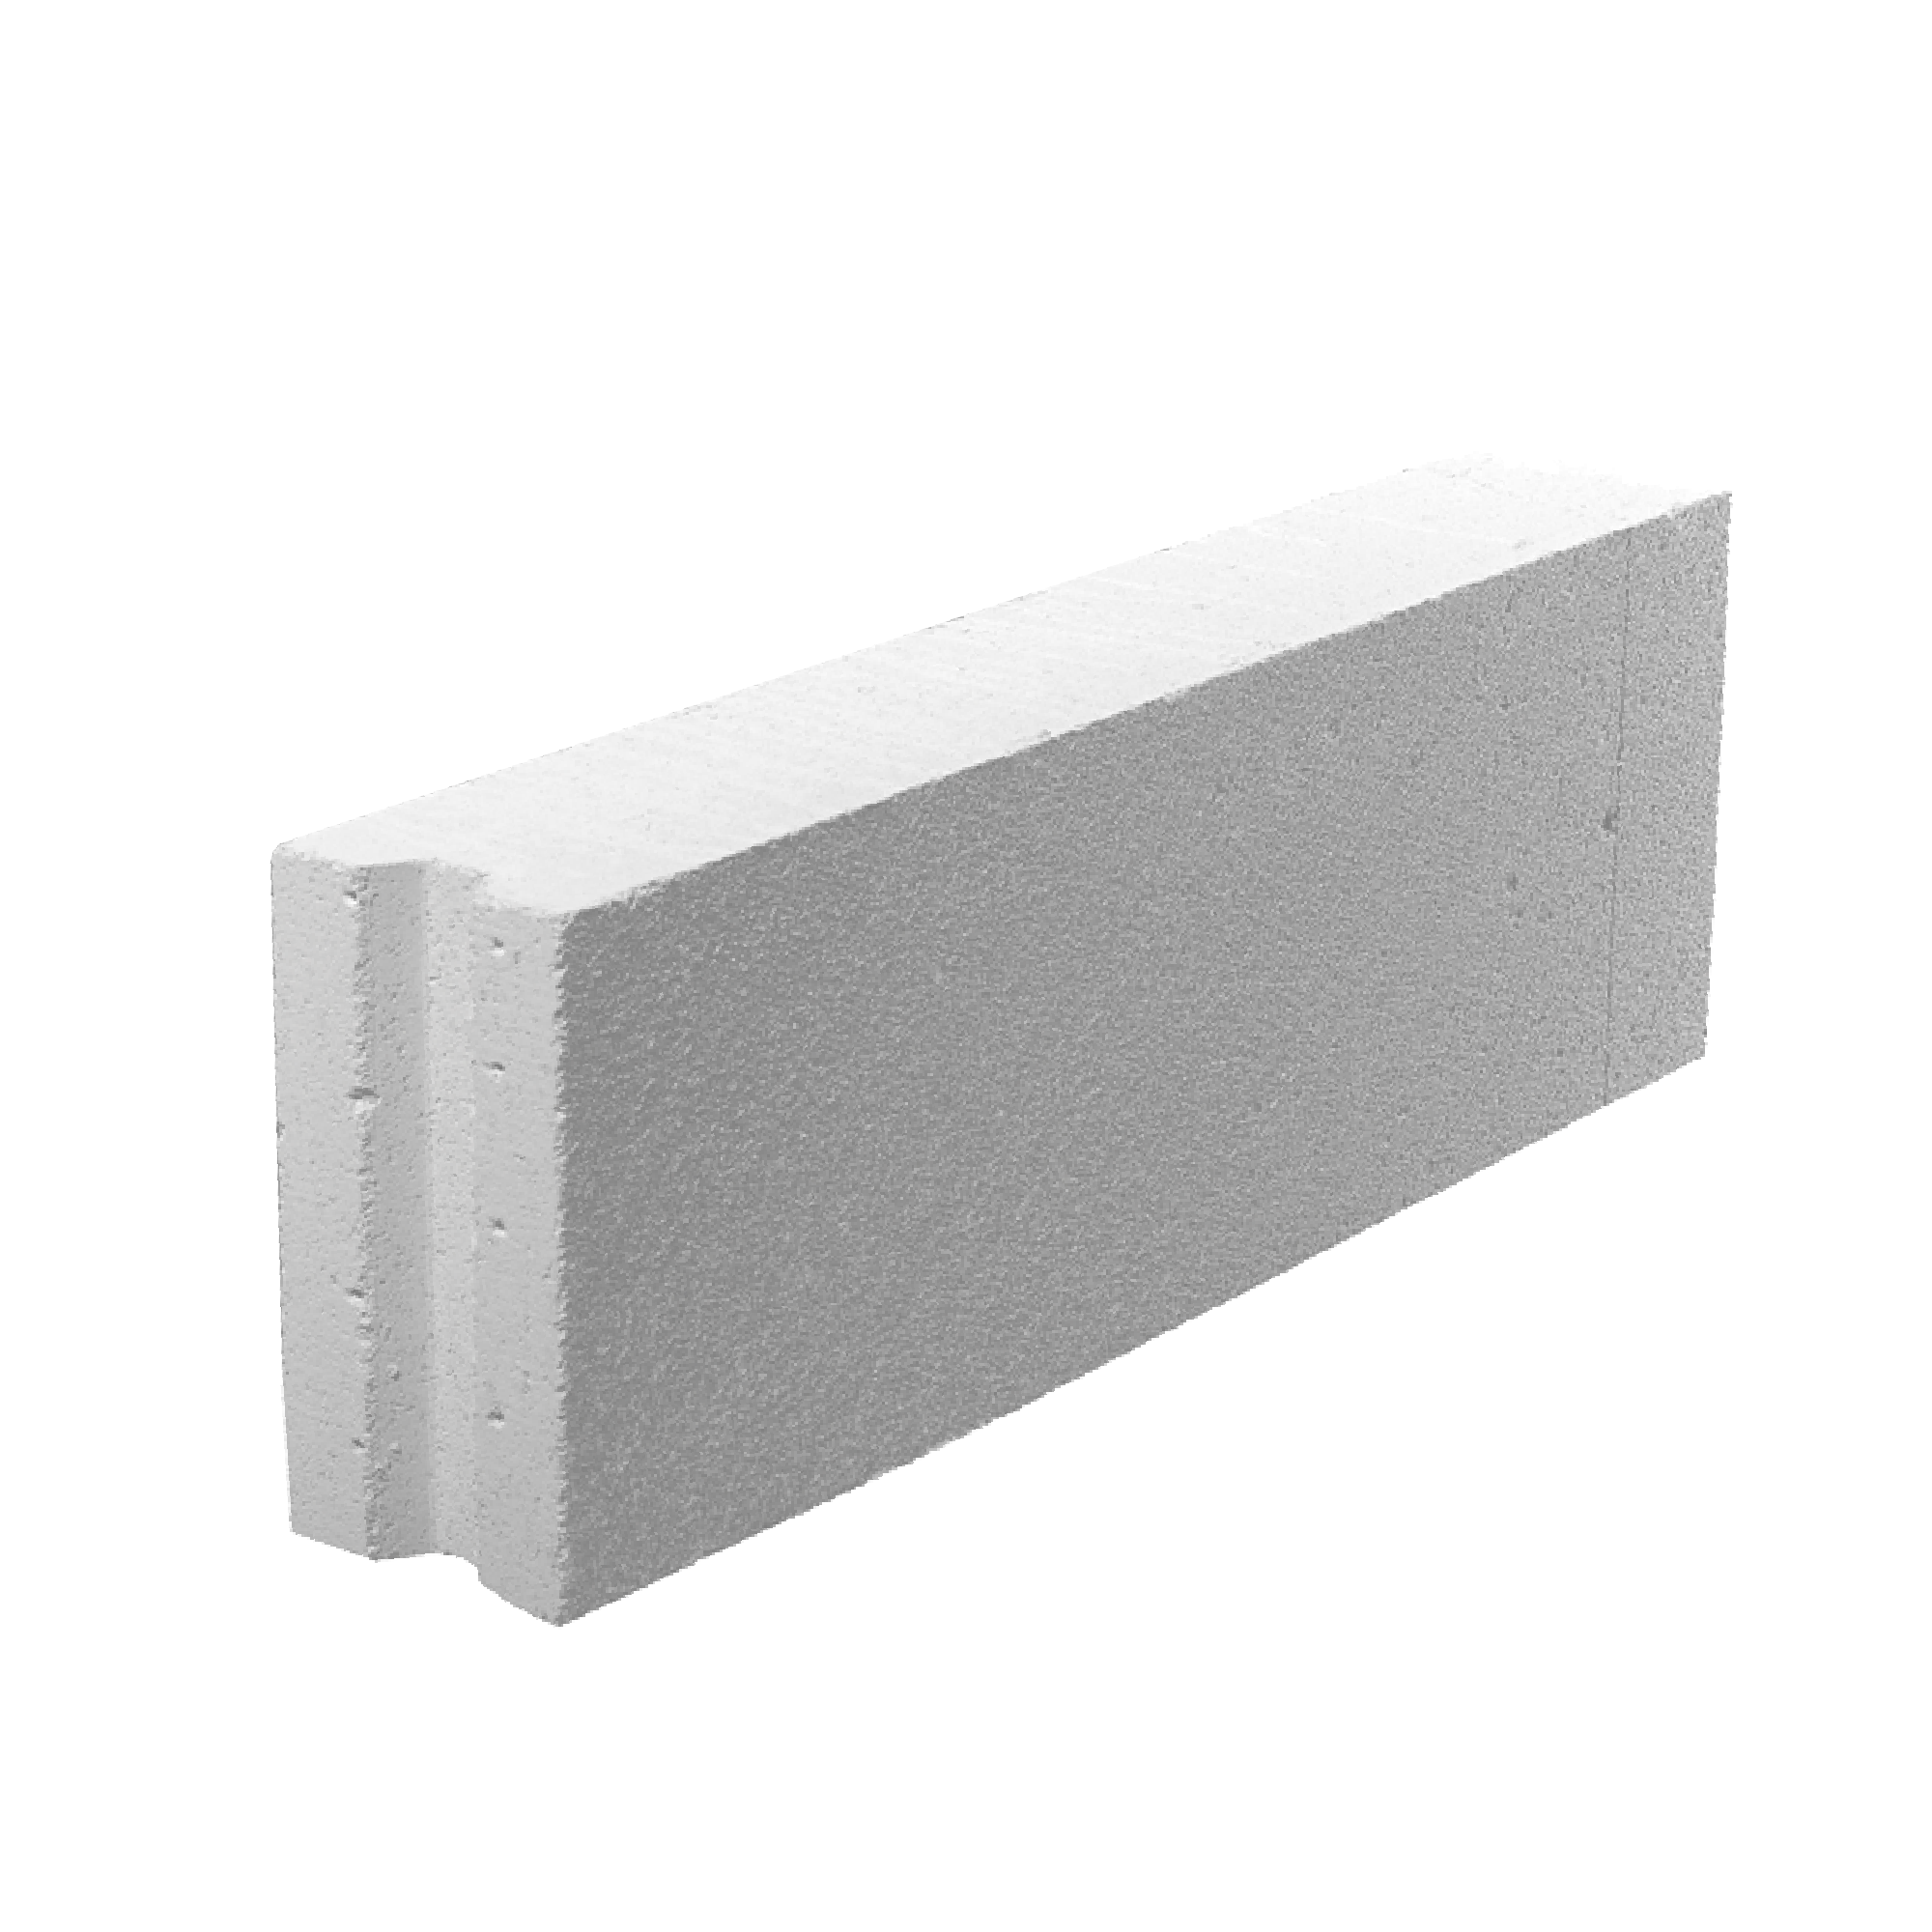 AAC Joggle Joint - AAC Ytong Interio D0.5, 599 x 125 x 199 mm joggle joint, https:maxbau.ro